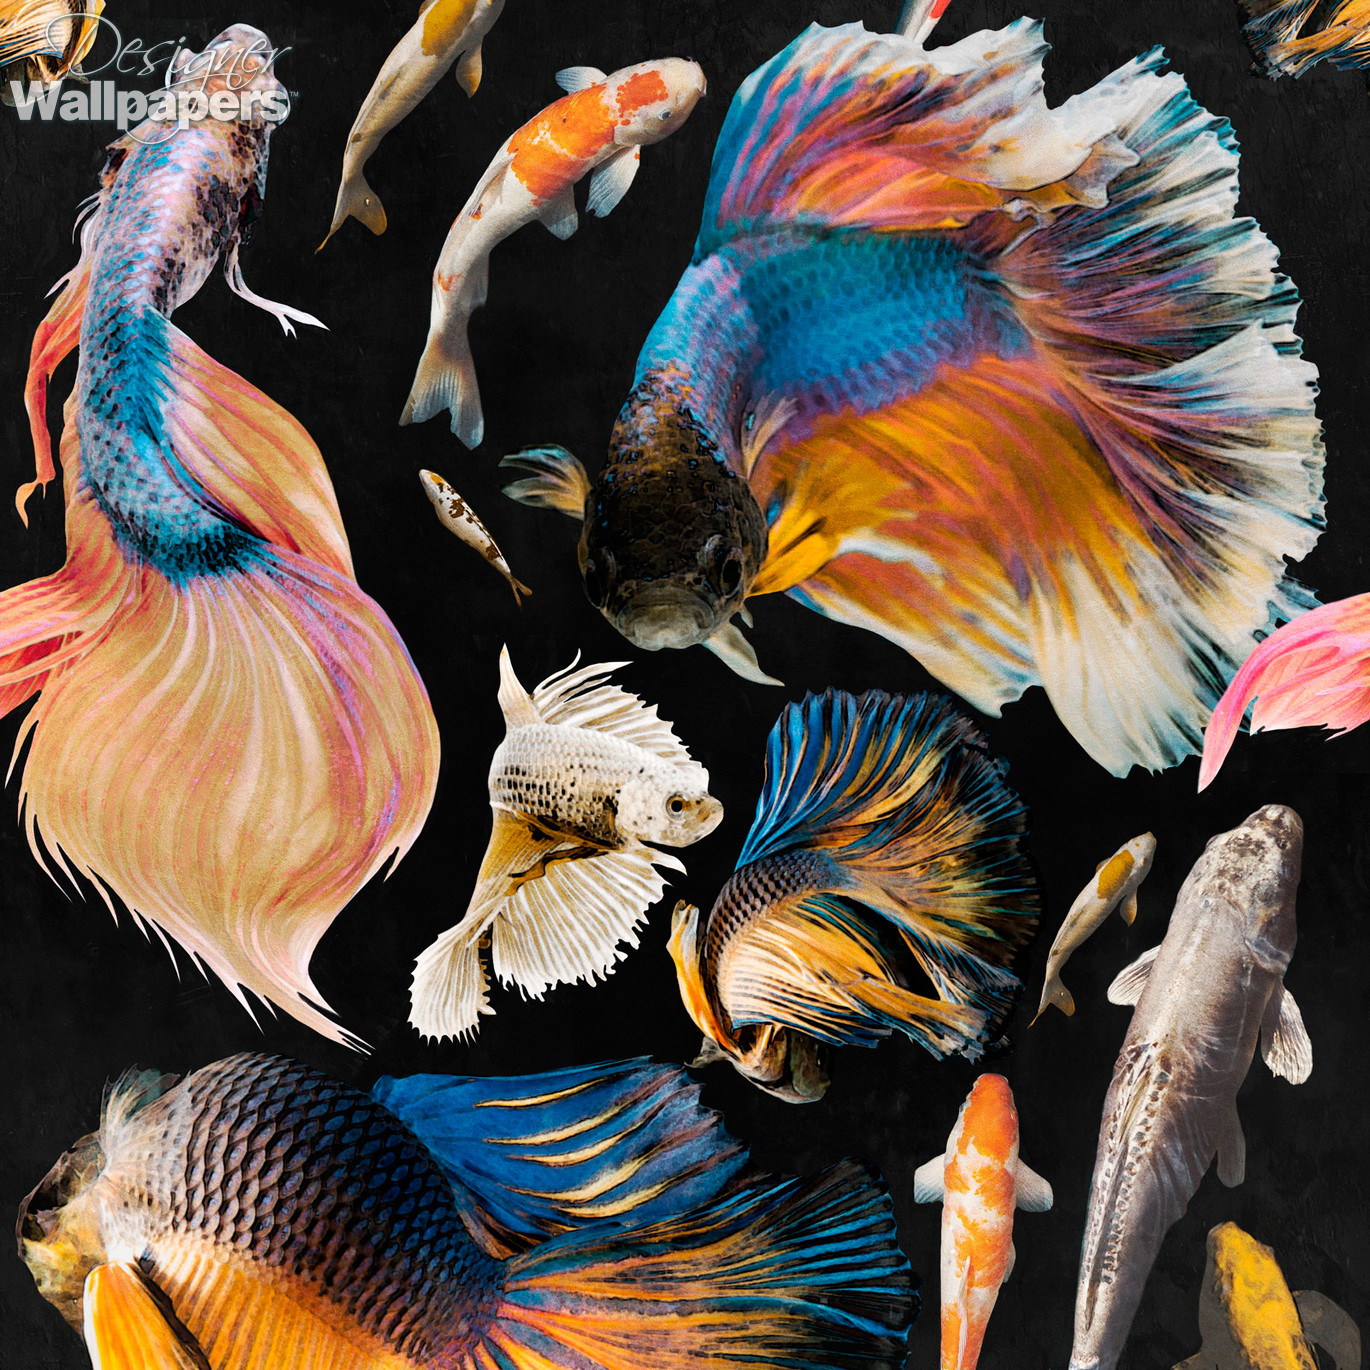 50+ Goldfish HD Wallpapers and Backgrounds